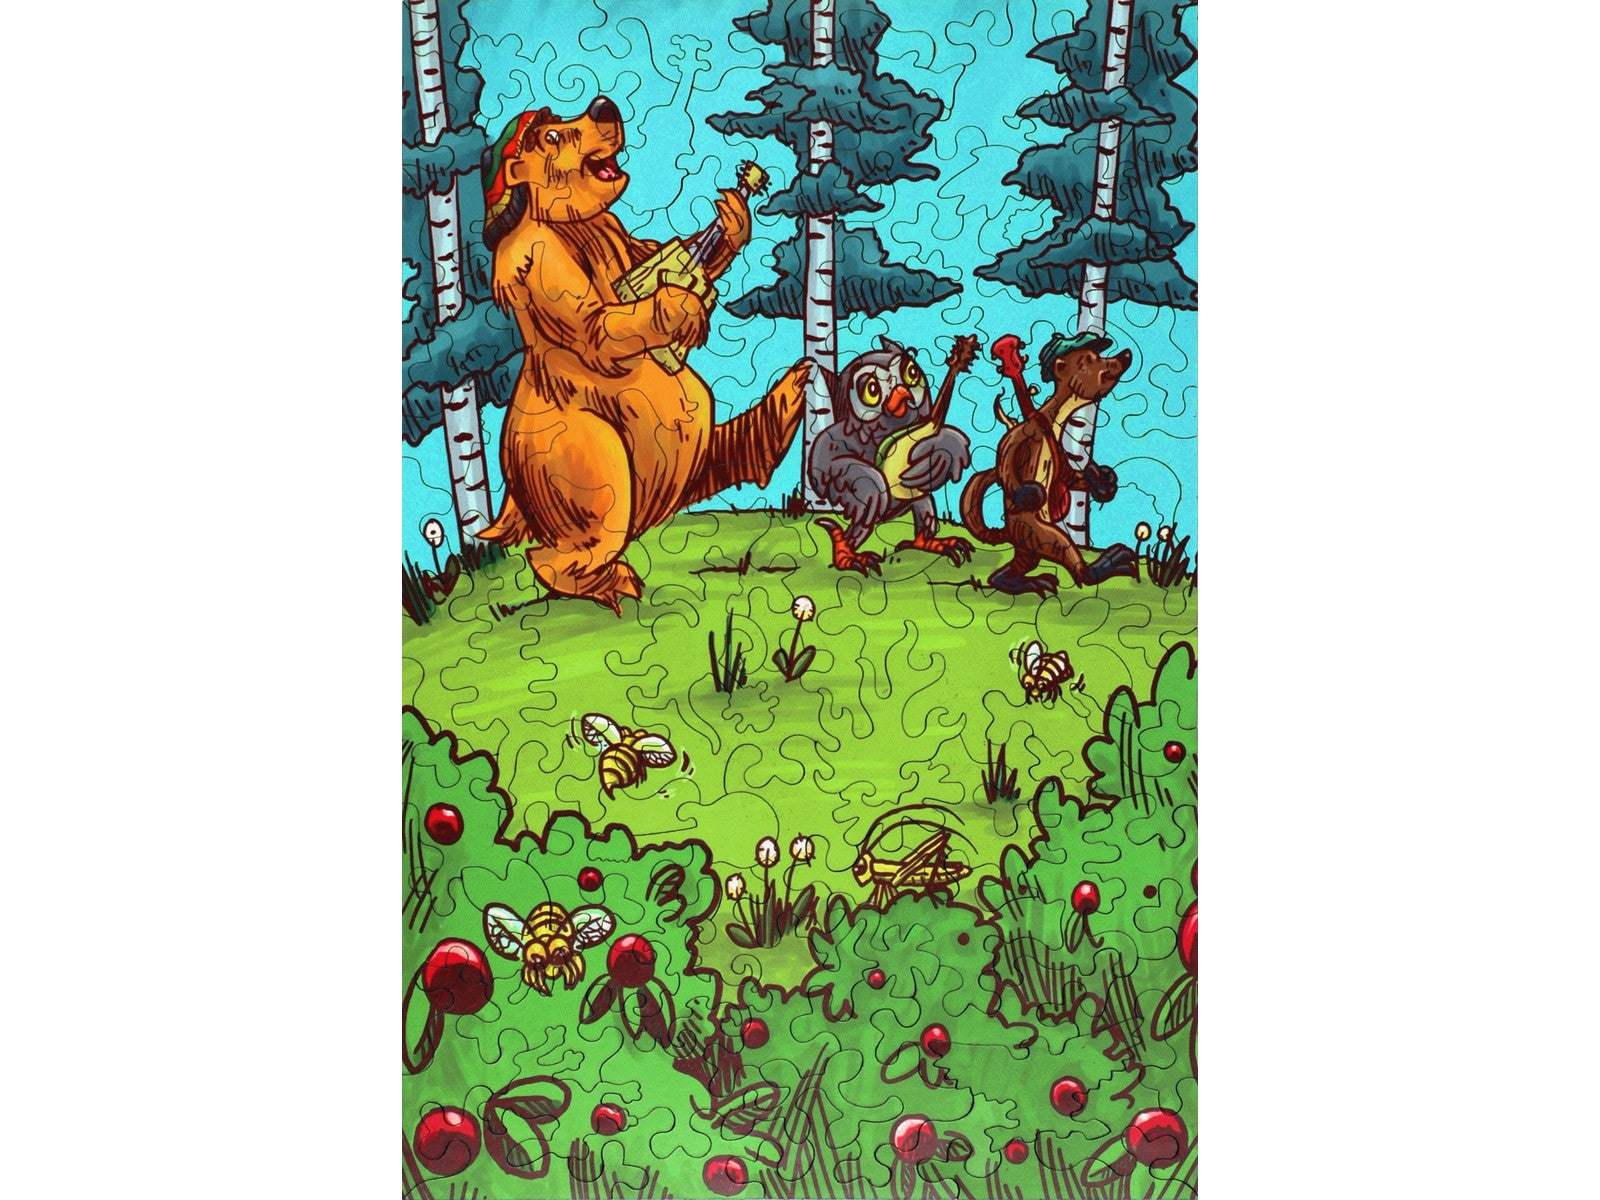 The front of the puzzle, Barry's Band, which shows a cartoon drawing of a bear, an owl, and a weasel playing musical instruments.